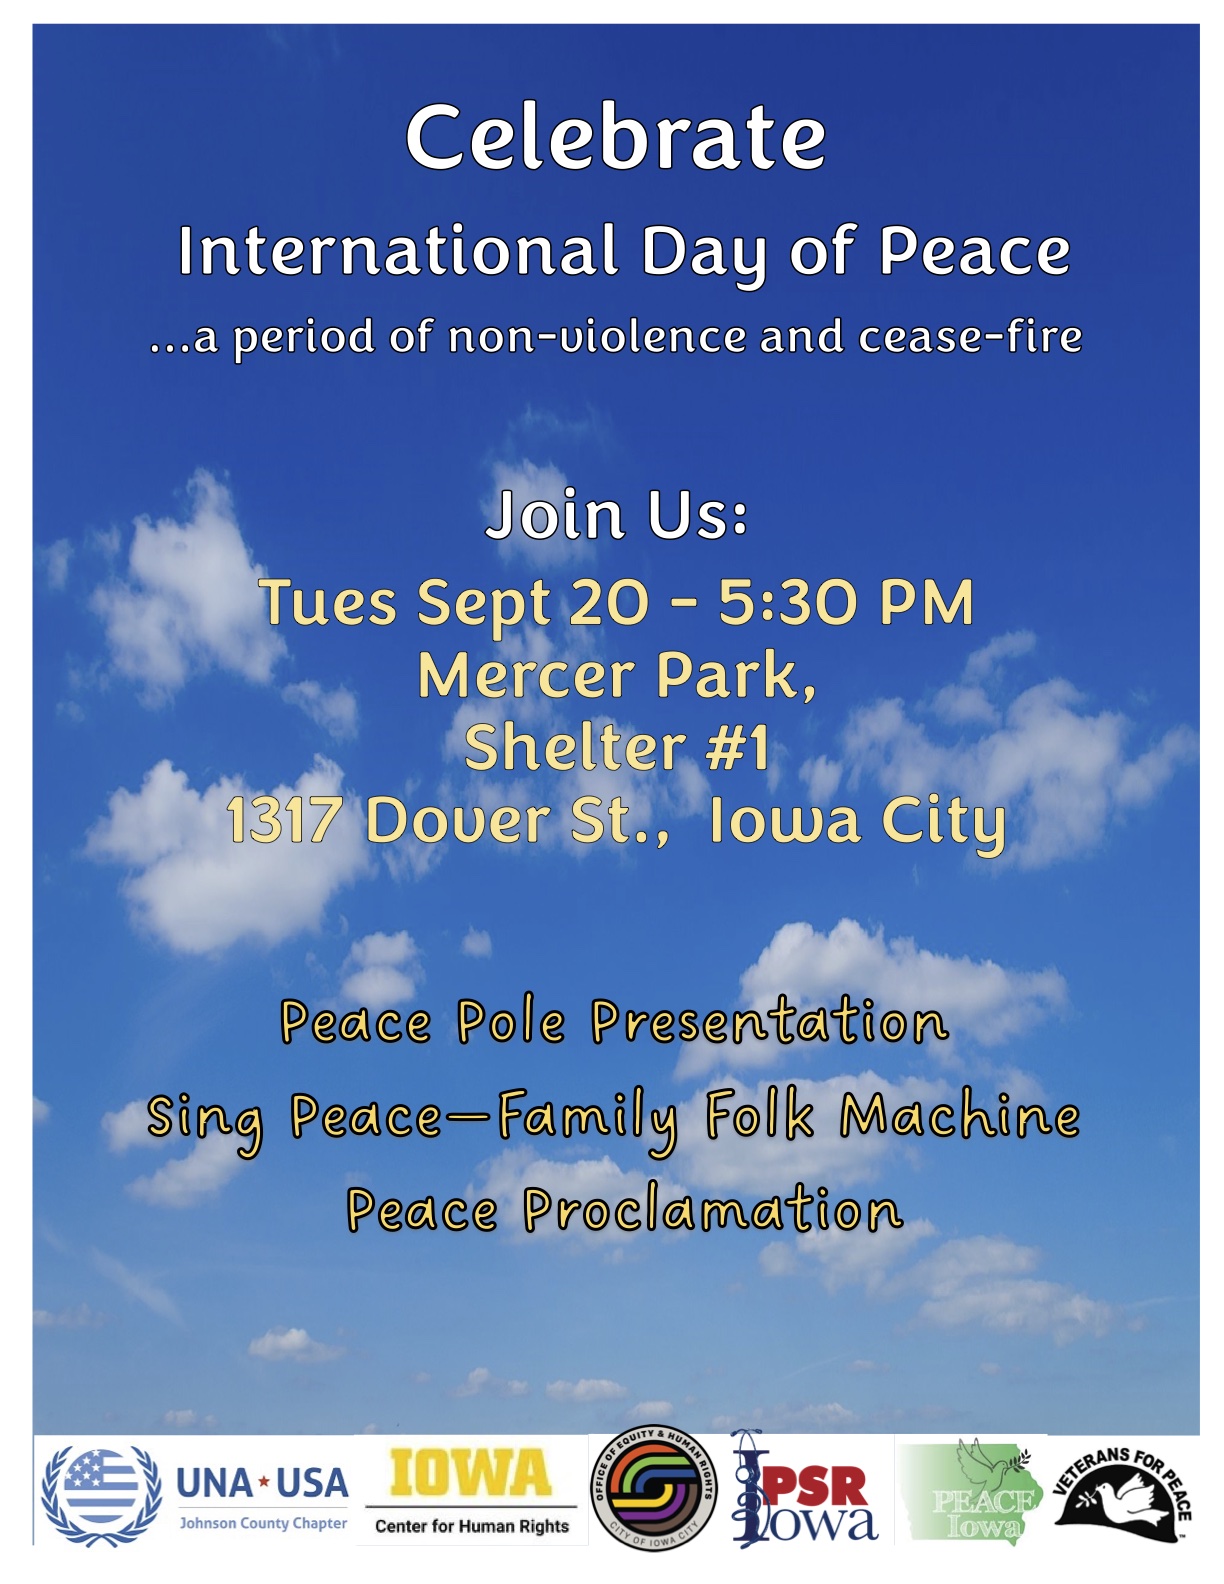 Celebrate International Day of Peace...a period of non-violence and cease-fire.Tues Sept 20 - 5:30 PM, Mercer Park, Shelter #1, 1317 Dover St., lowa City. Activities include: Peace Pole Presentation; Sing Peace - with Family Folk Machine; Peace Proclamation